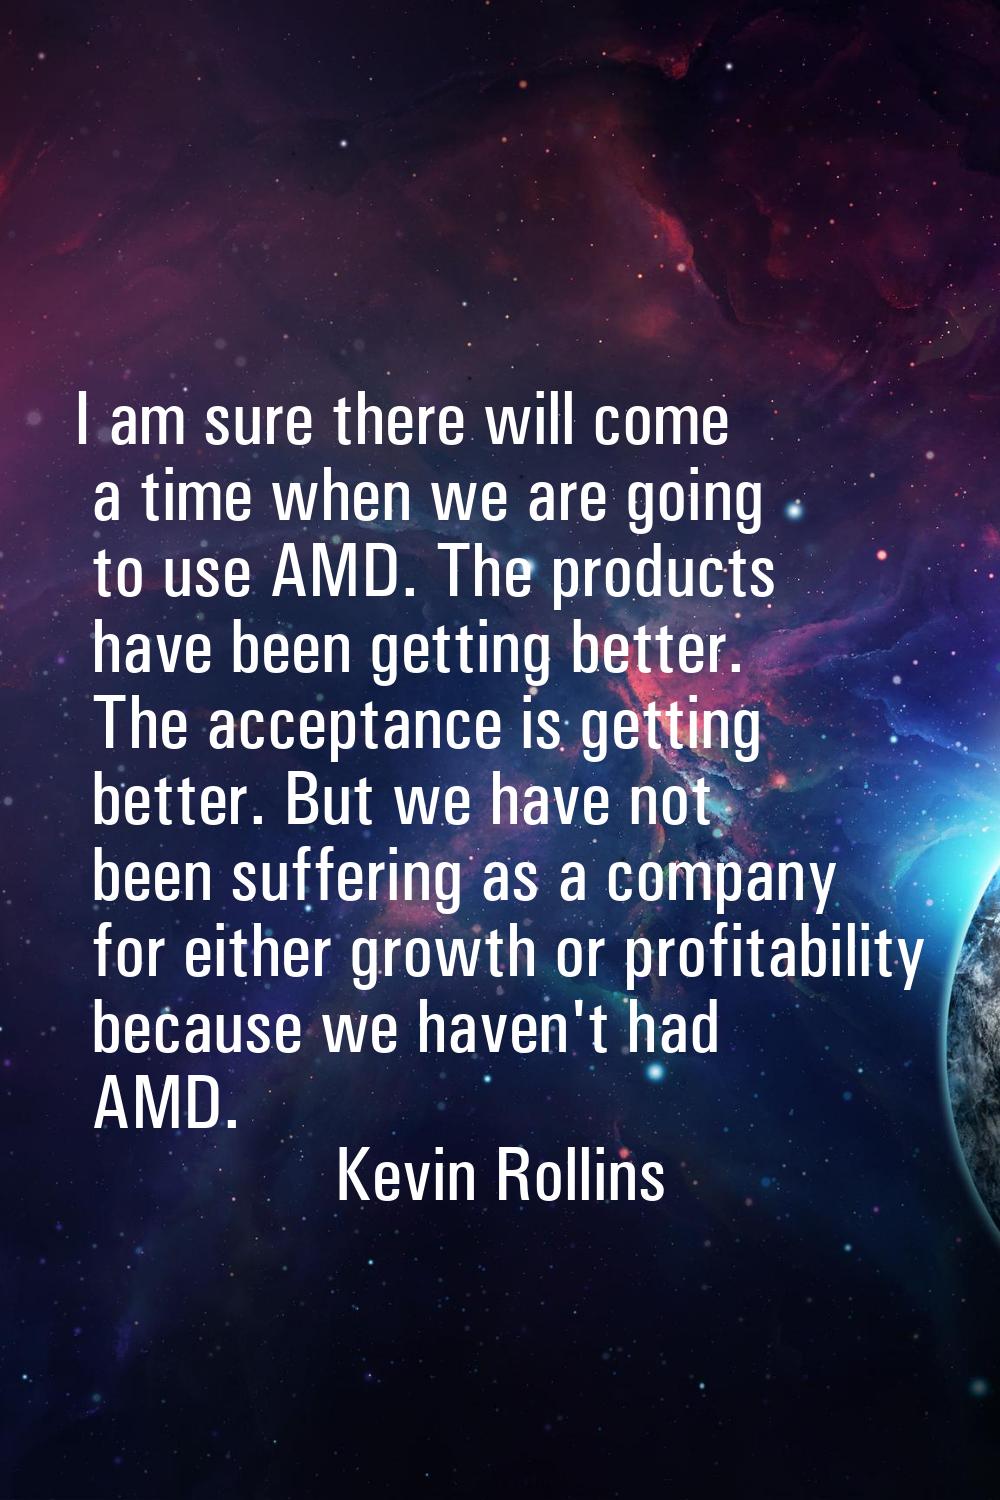 I am sure there will come a time when we are going to use AMD. The products have been getting bette